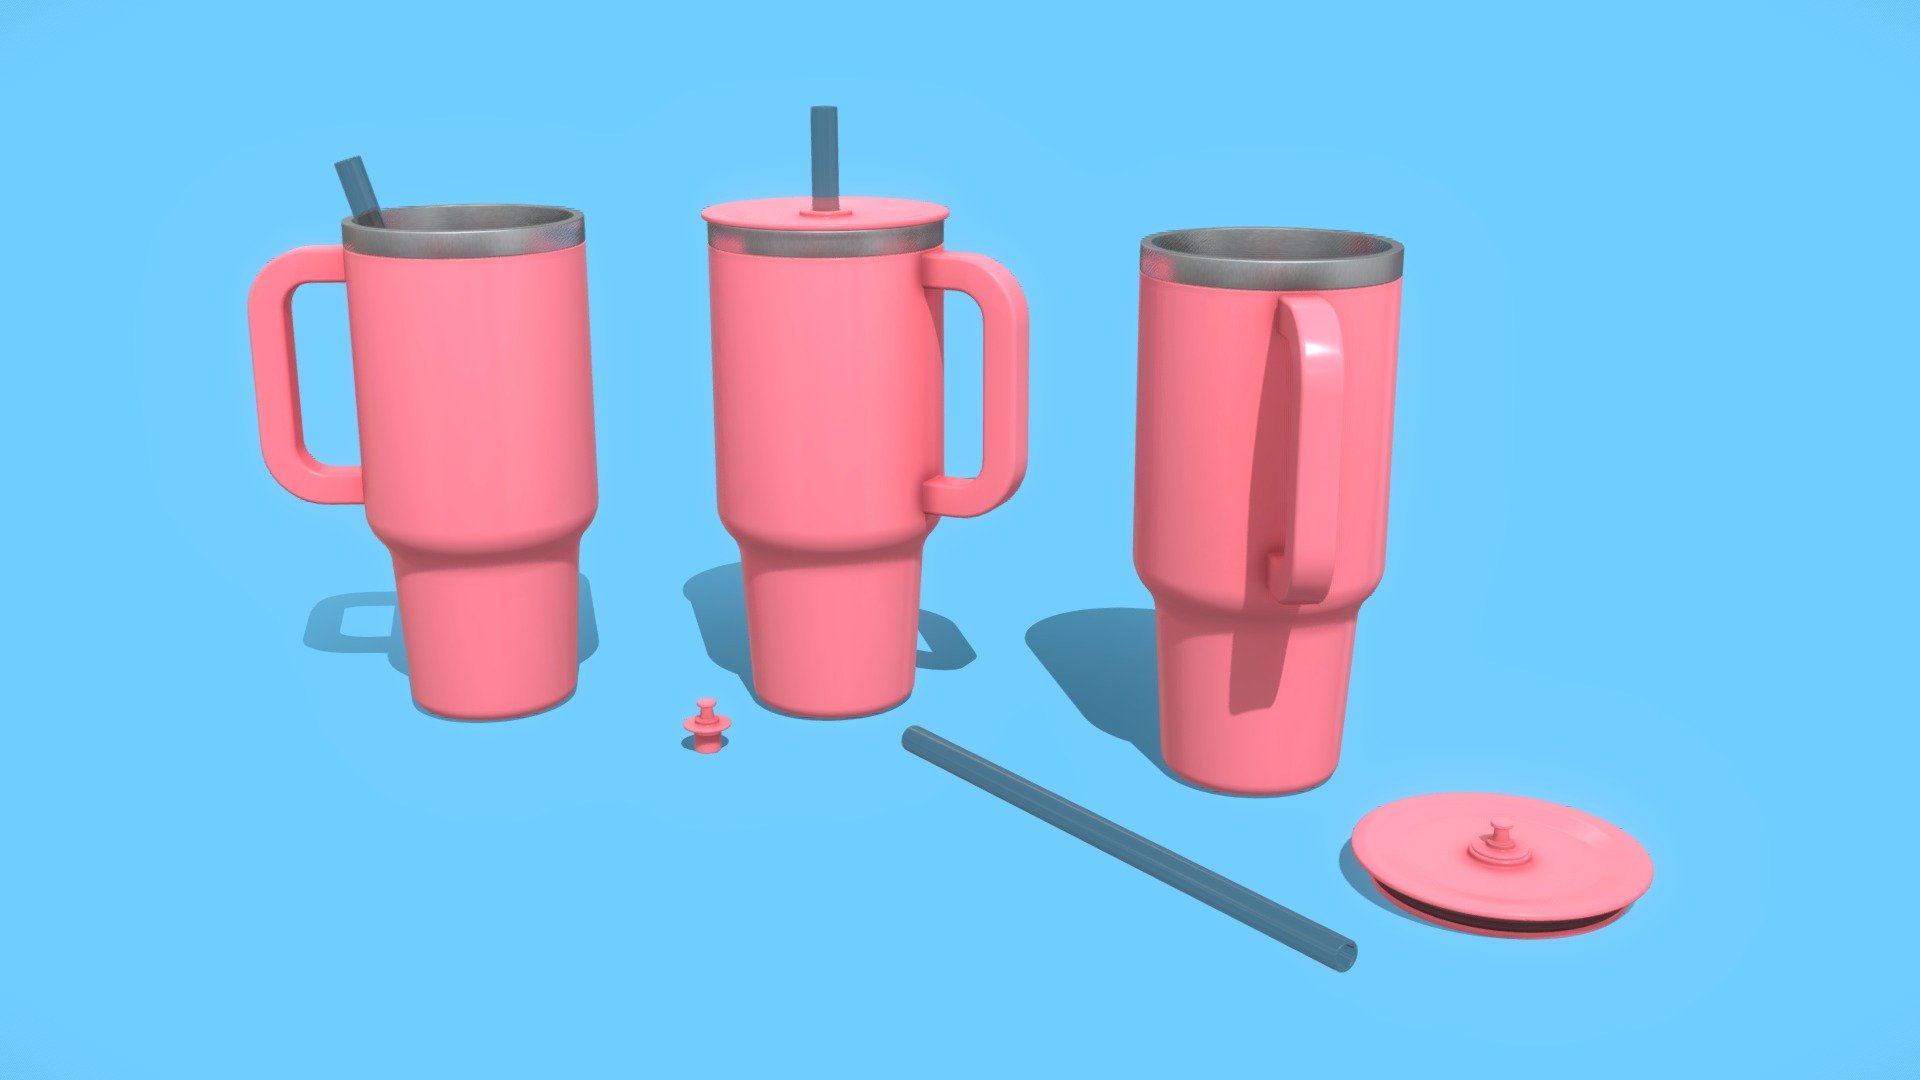 A 3D Travel Tumbler.


3D MODEL



Includes BLENDER file.

Includes FBX file with embedded textures.

Includes glTF file.

Includes OBJ and MTL files.

Includes Textures folder

Textures' resolution is 2048x2048p.

Textures include: Base Color, Height, Normals, Roughness, Metallic

Textures format: PNG

Total PNG files: 20

The opacity effect is done here on Sketchfab. The Straw’s opacity/transparency effect is not included in the 3D model. However you can edit the BLENDER file to add the opacity effect.


Complete ZIP file is in the &ldquo;FBX Format:DOWNLOAD